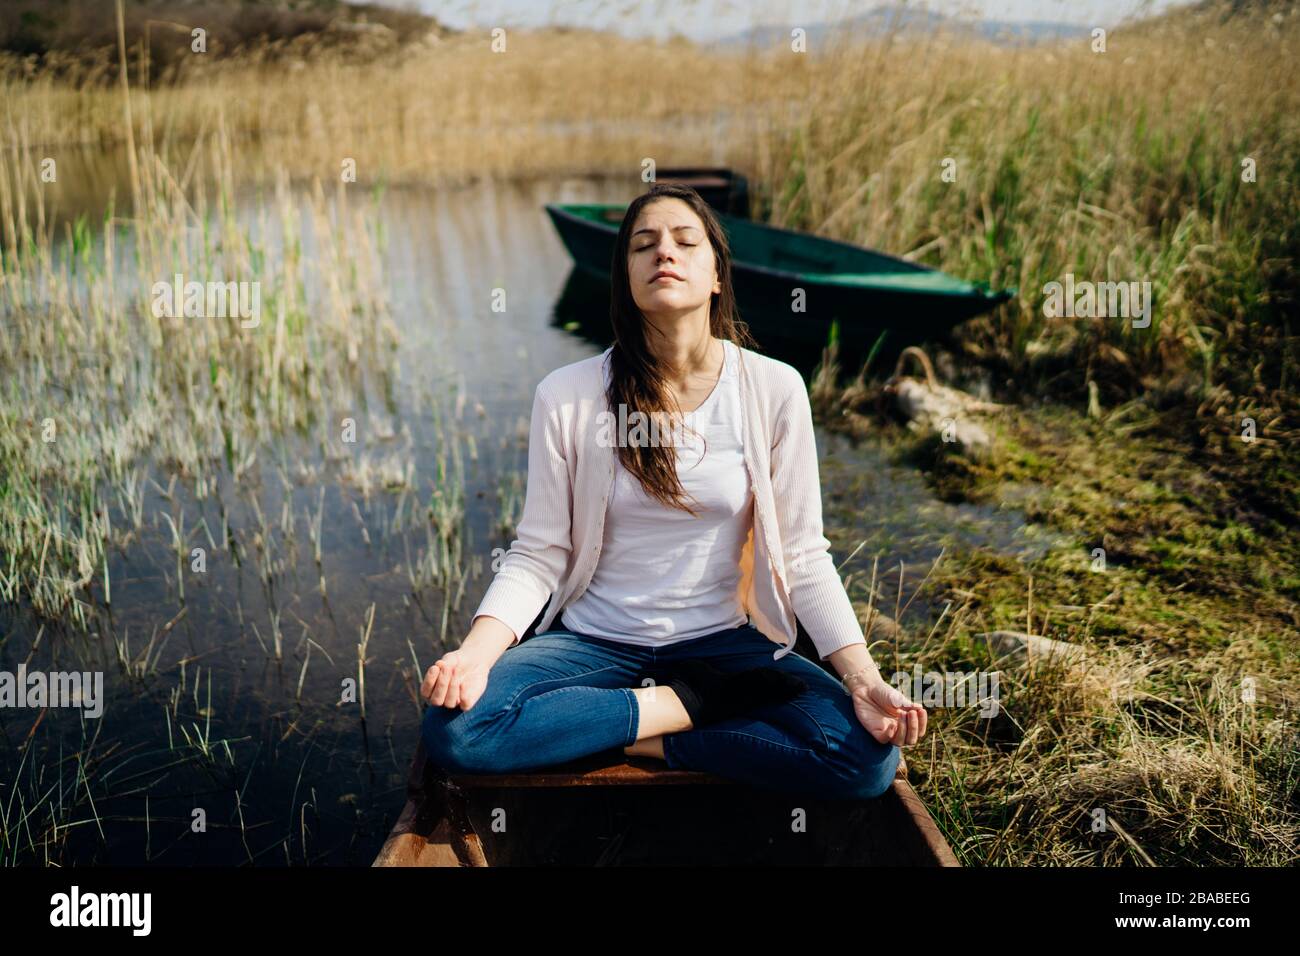 Woman meditating in nature.Escape from stressful reality.Mindful woman practicing meditation.Breathing technique.Mental state issues menagement. Stock Photo